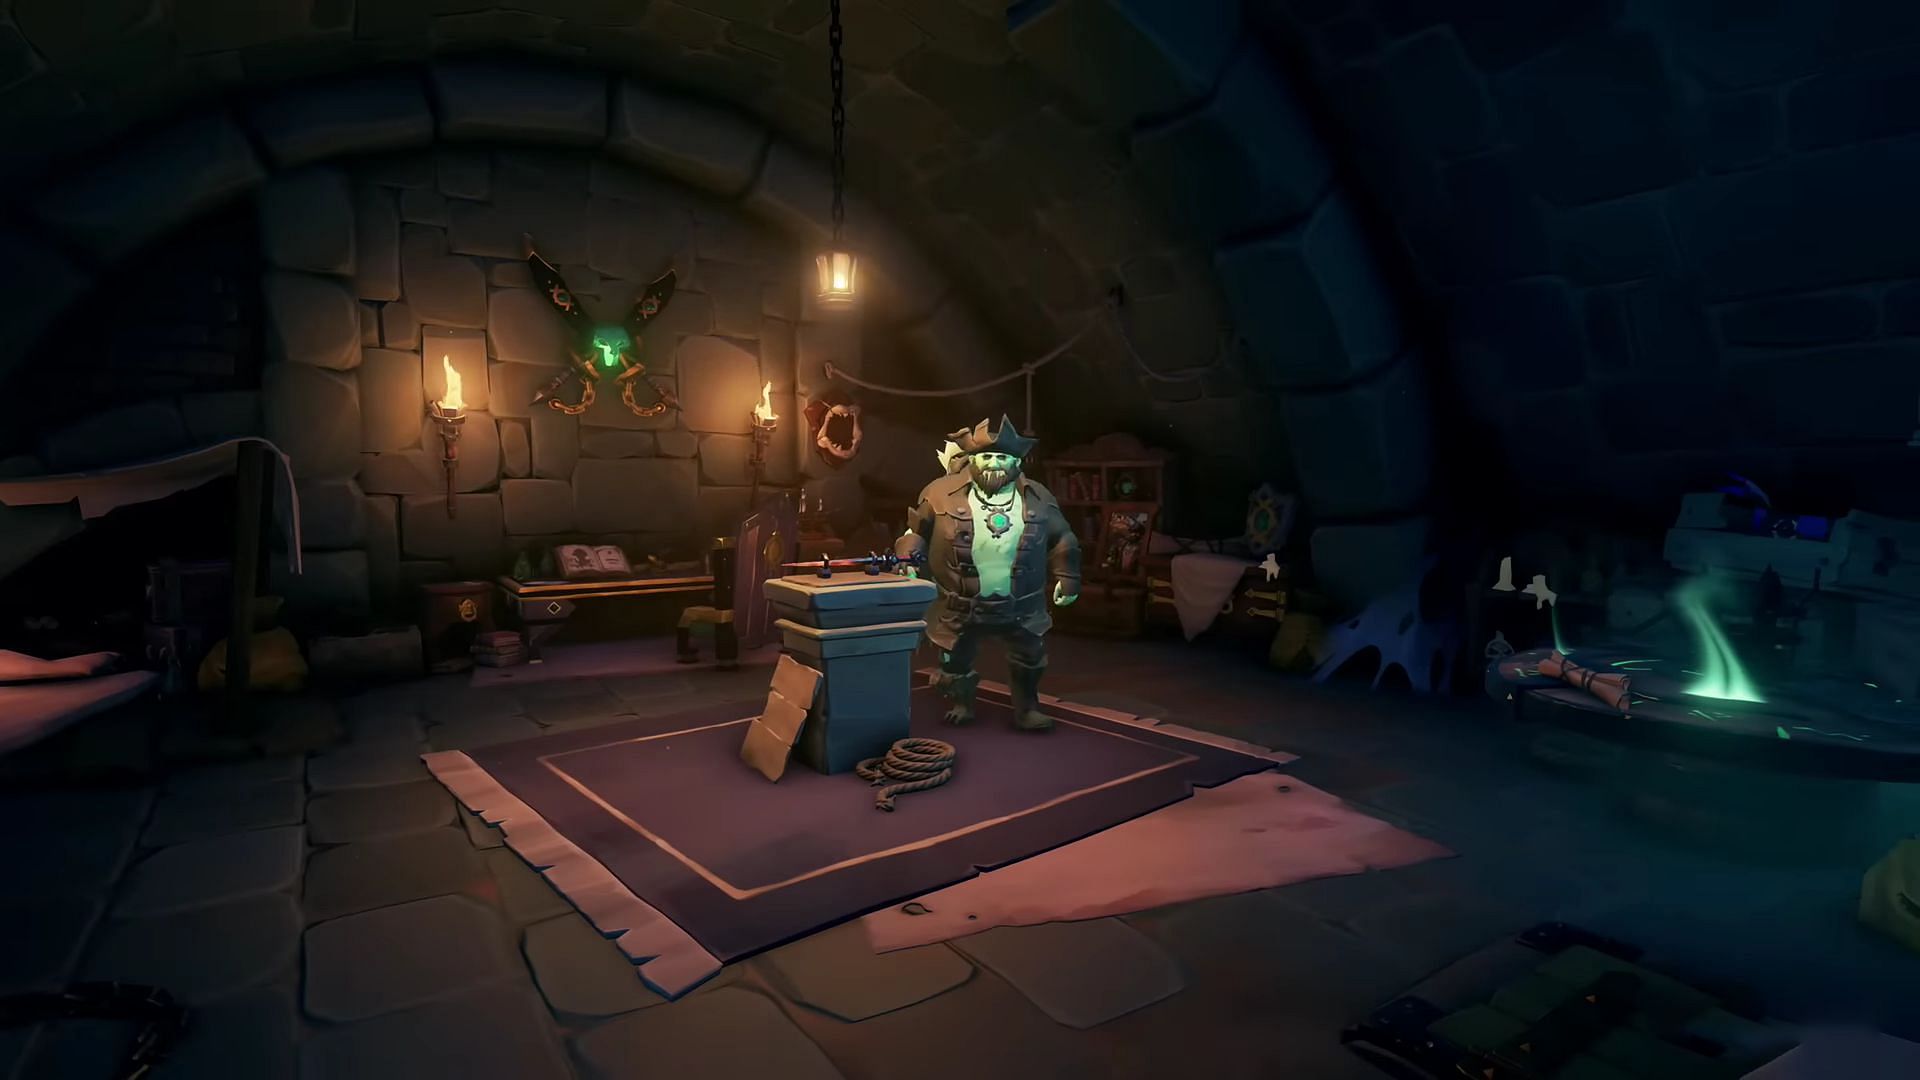 Meet the Pirate Lord in the hideout in Sea of Thieves (Image via Rare)